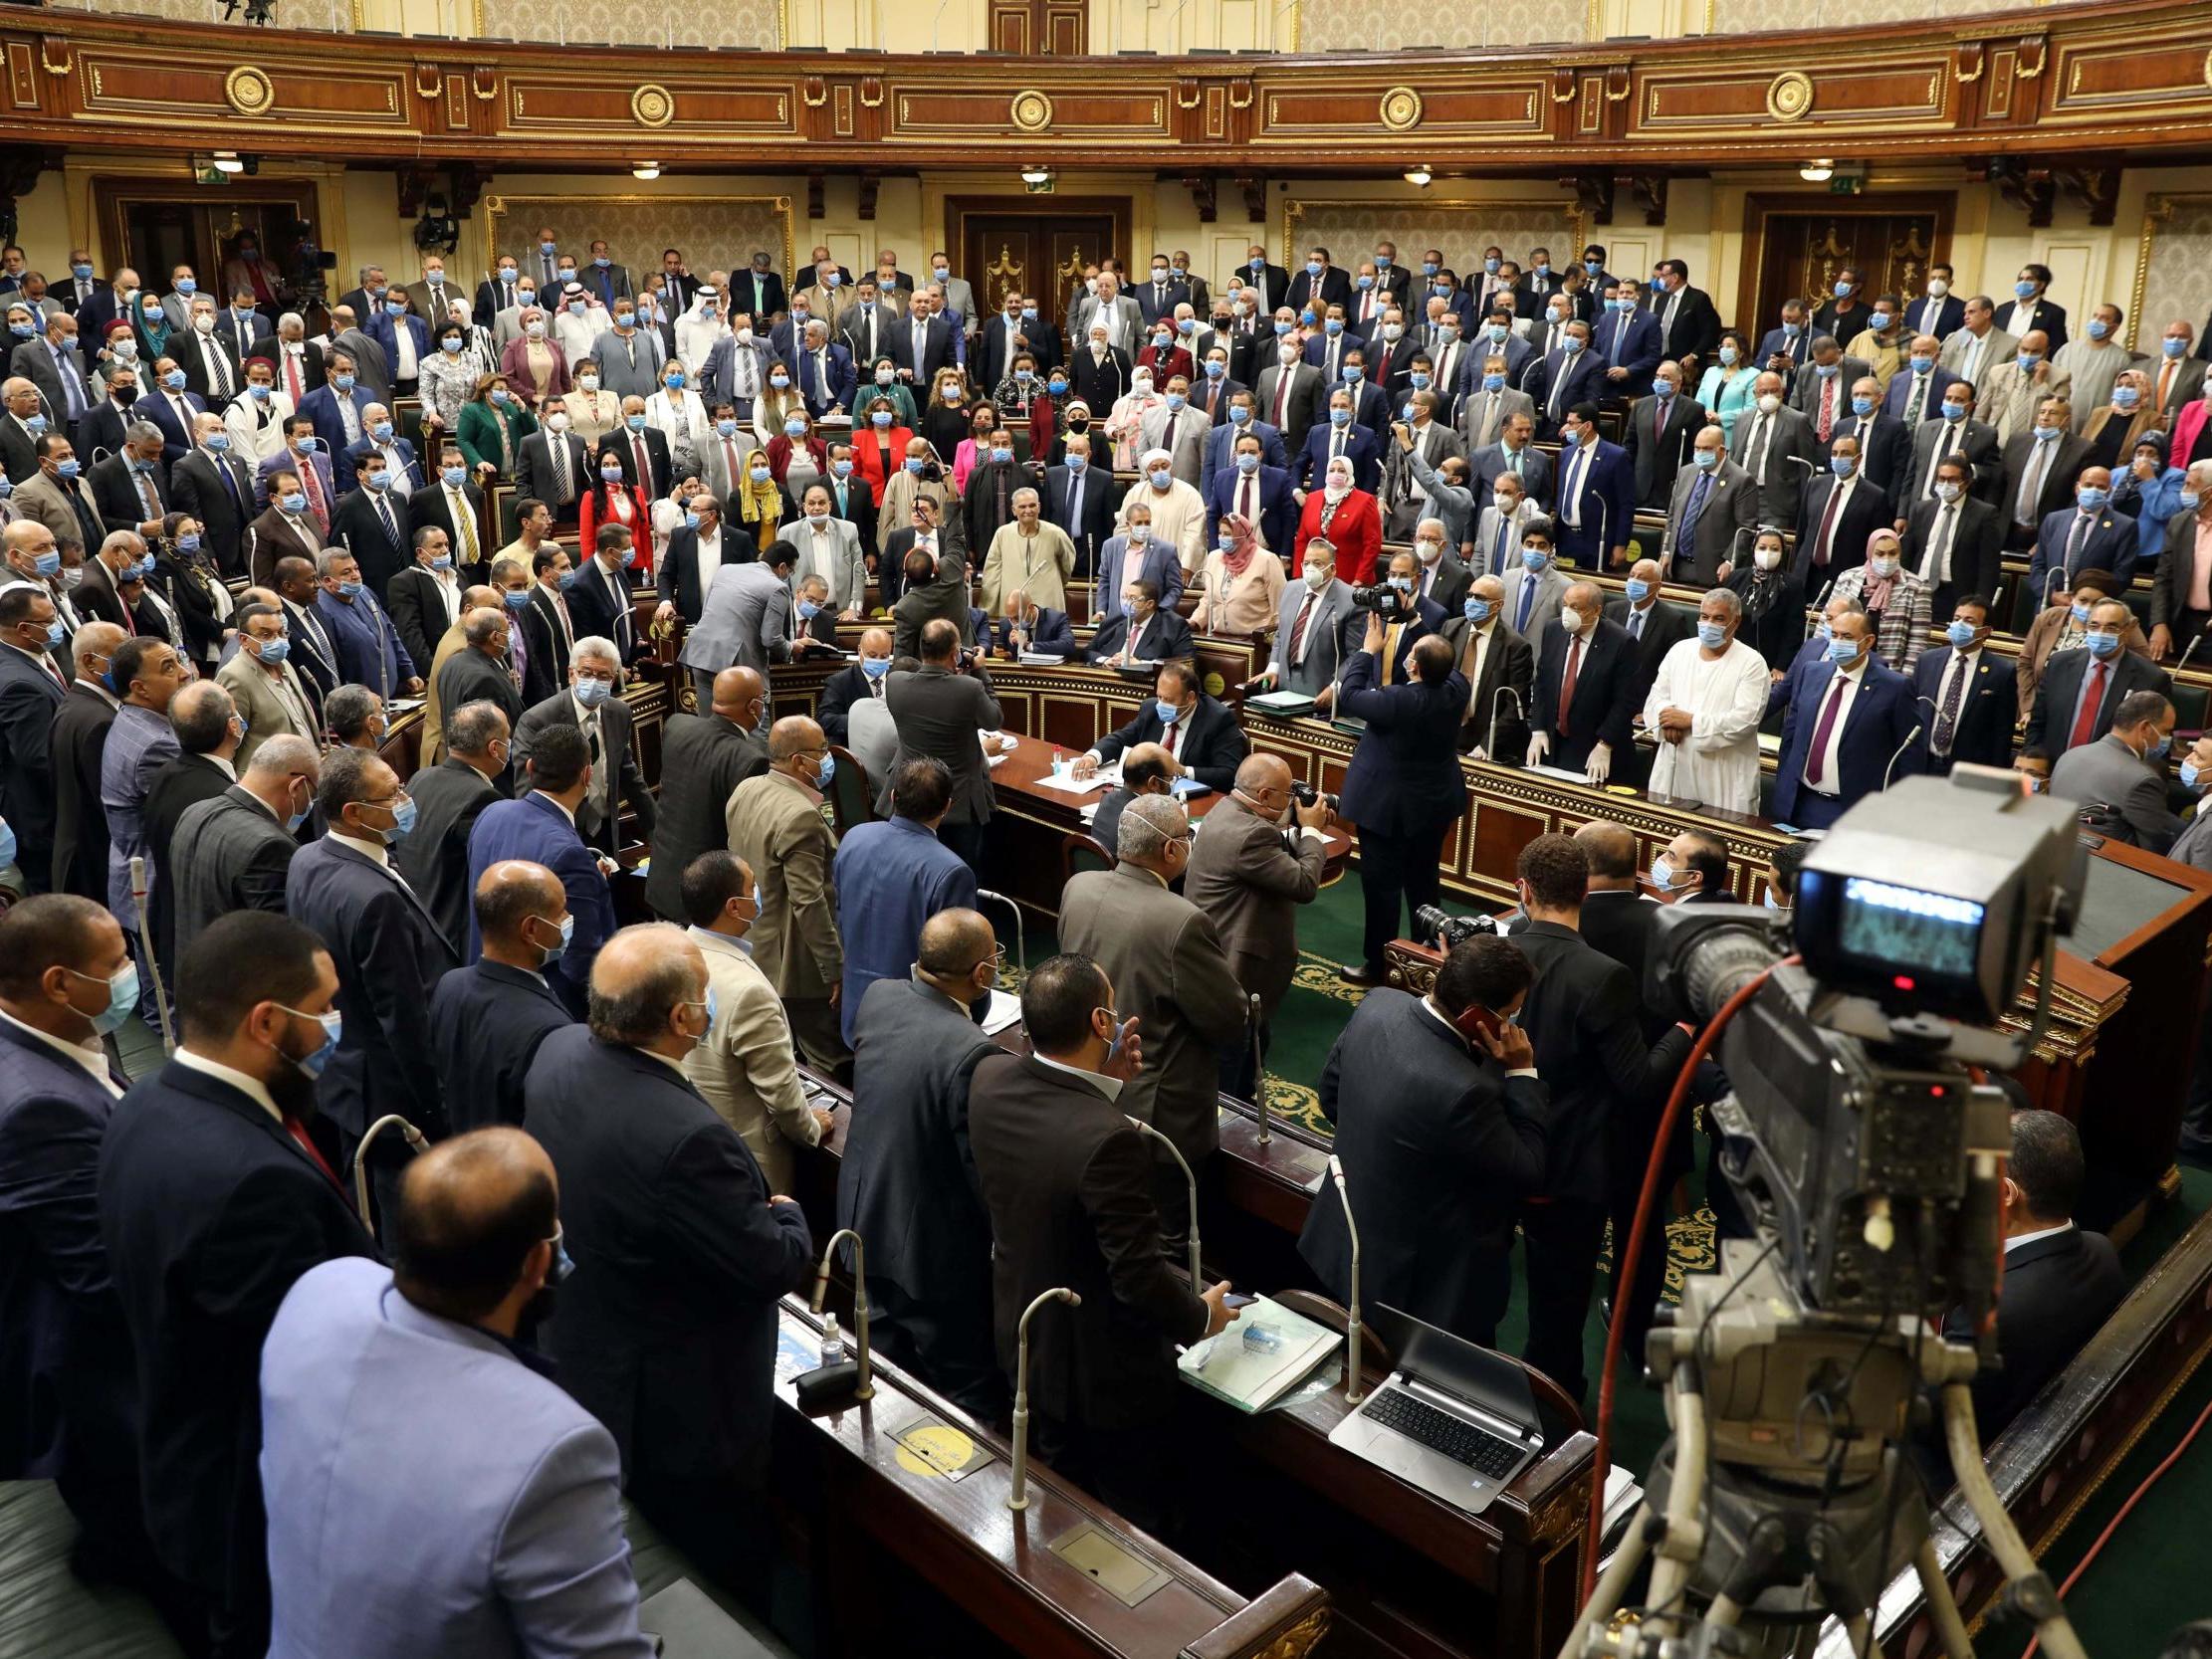 Egypt’s House of Representatives attended a closed-door session on Monday and approved plans to send troops to 'defend Egyptian national security'